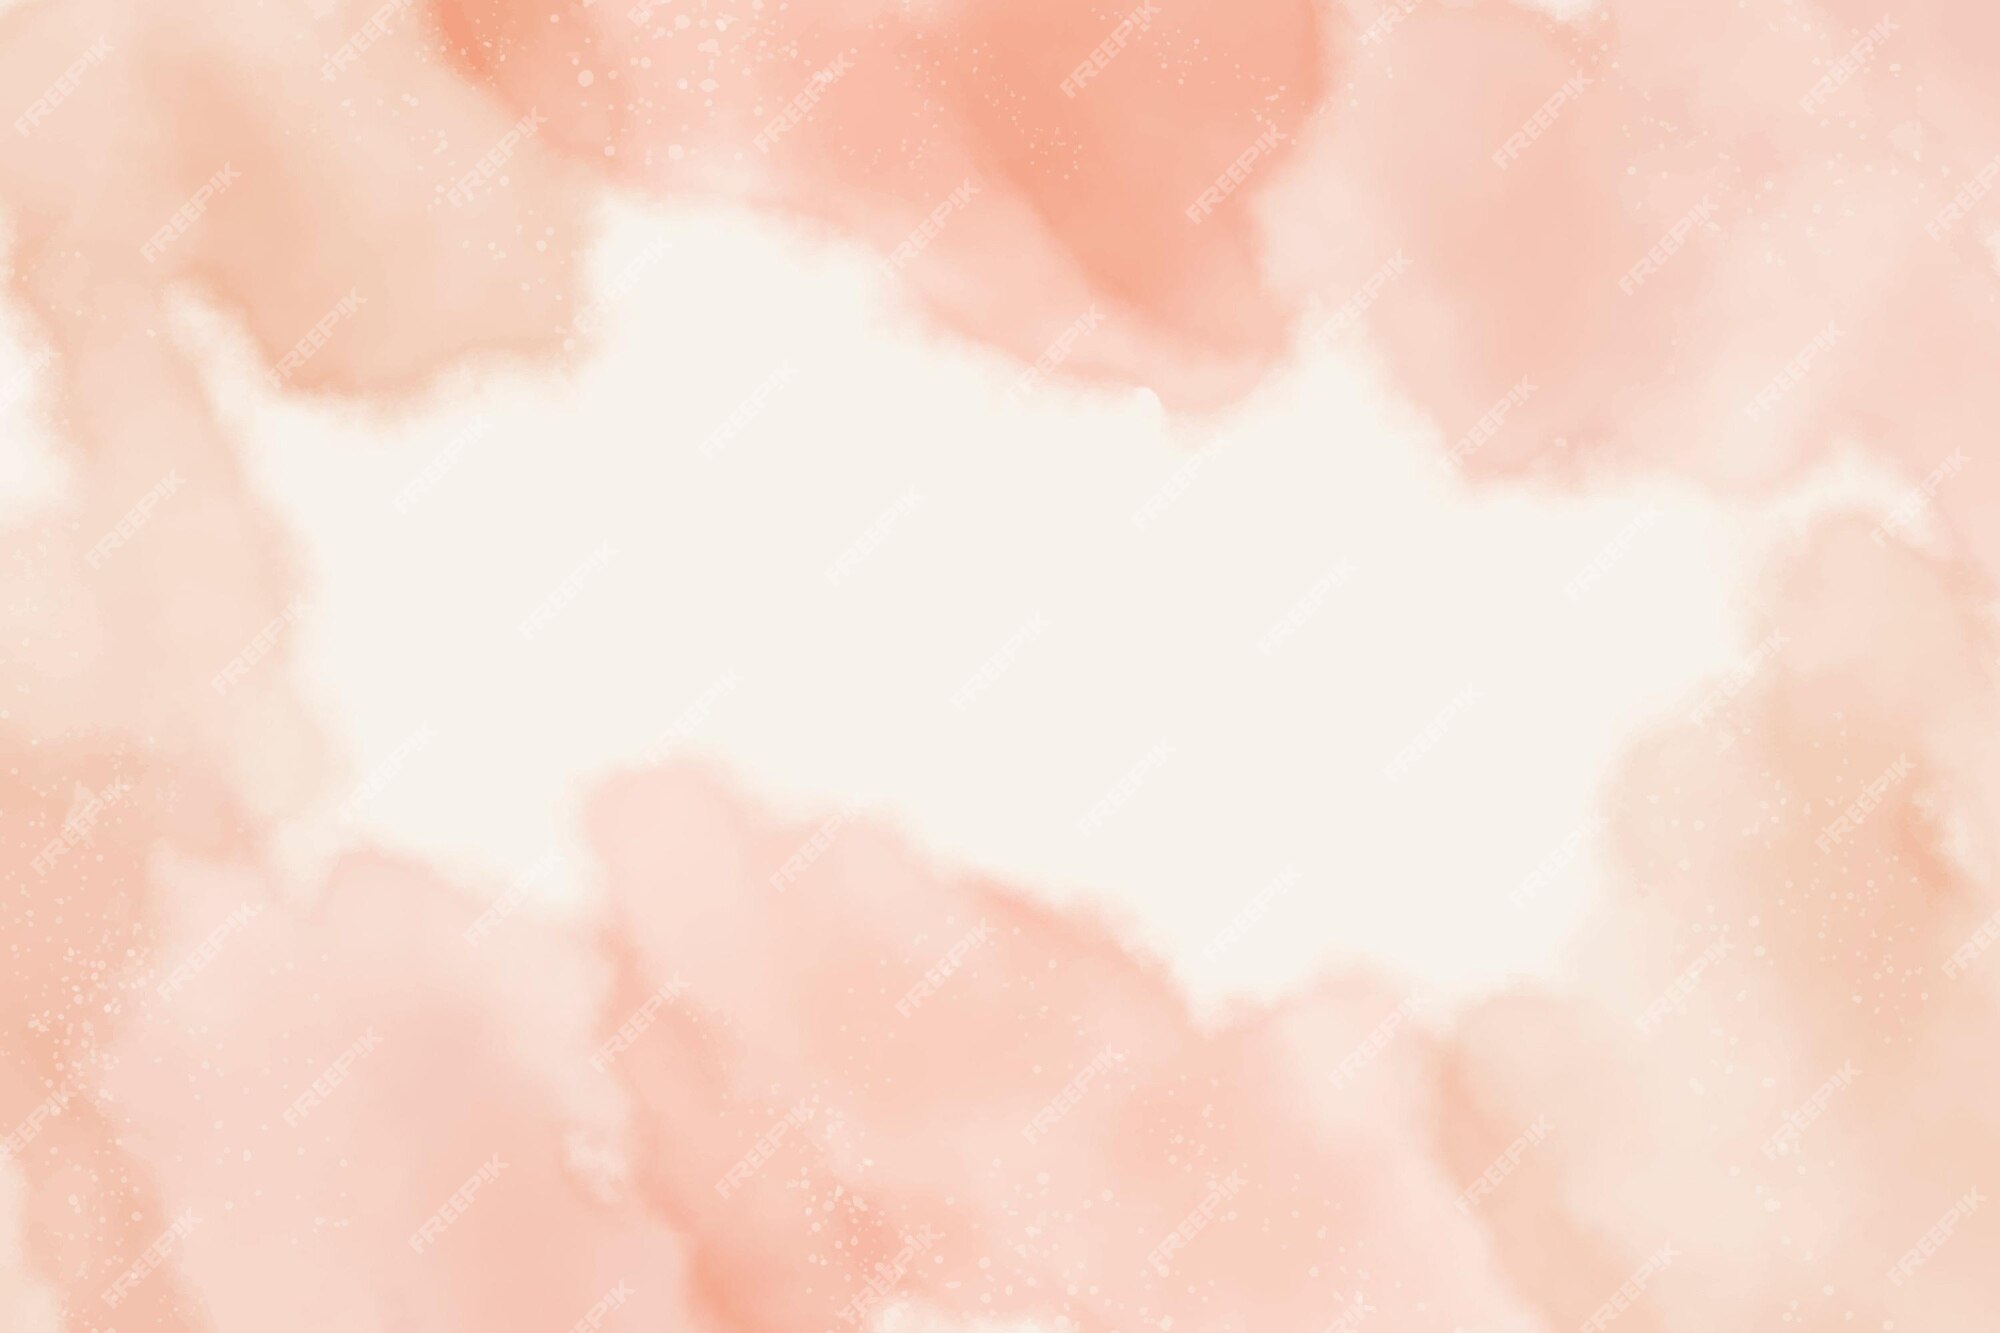 Peach Background Images - Free Download on Freepik